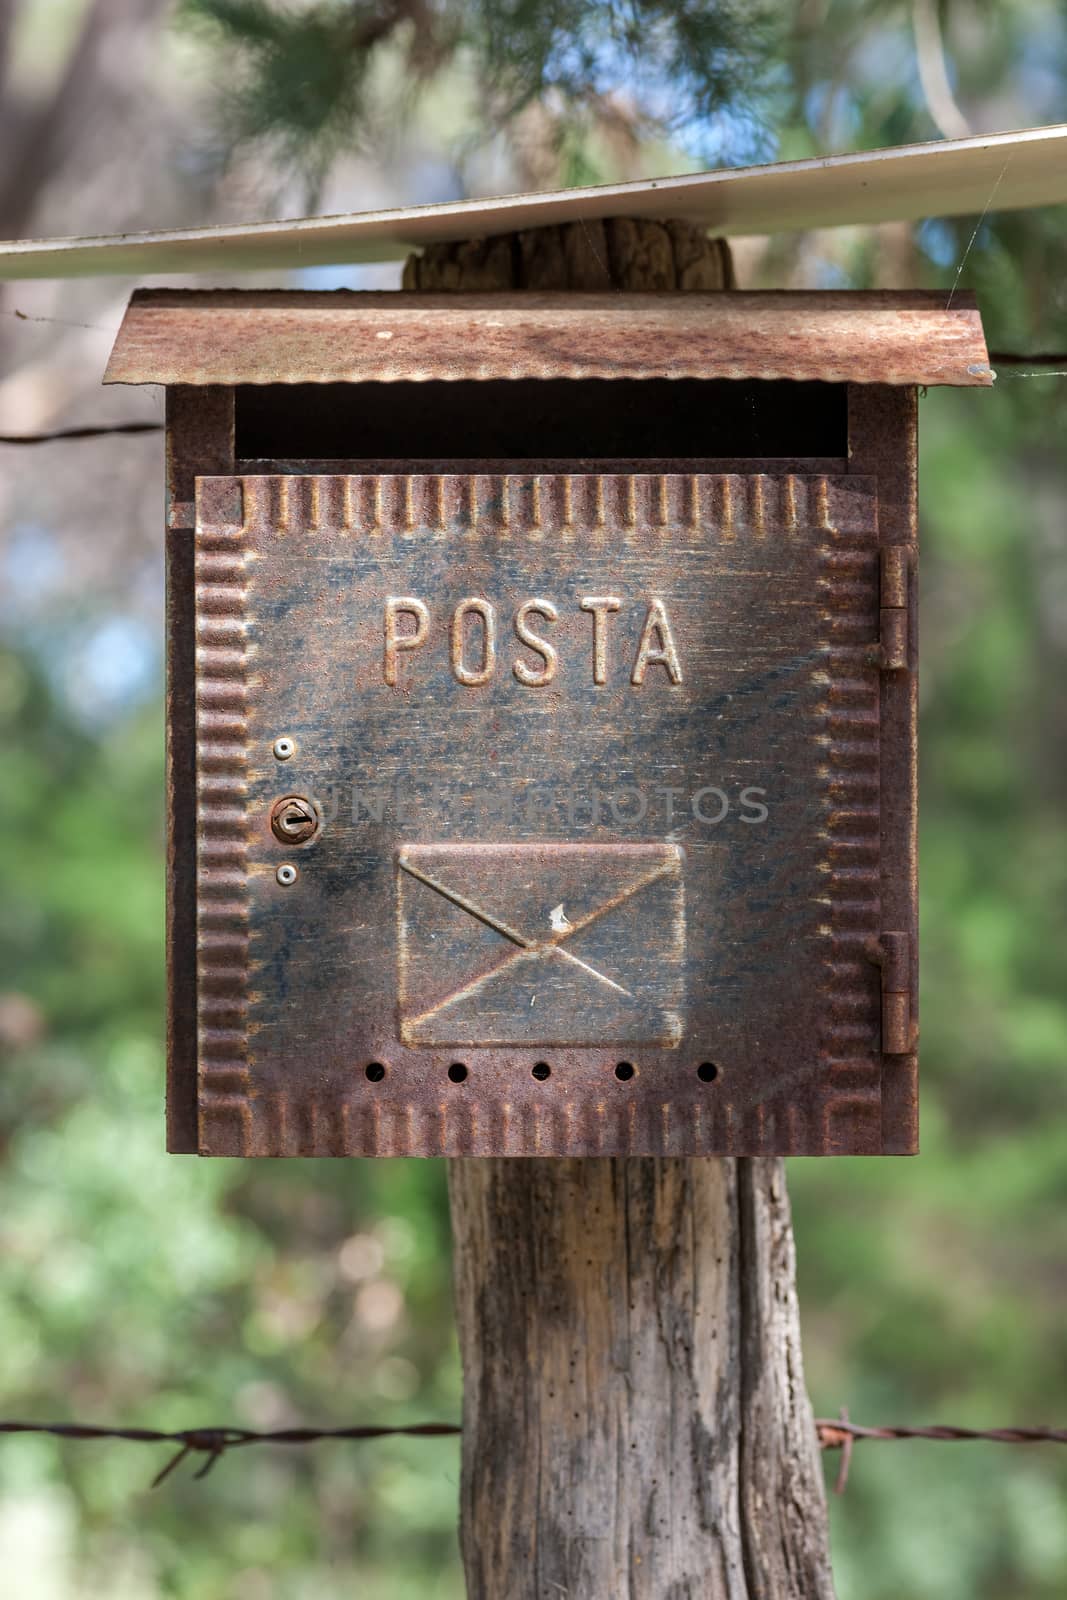 The country  metal letterbox in Tuscany, Italy